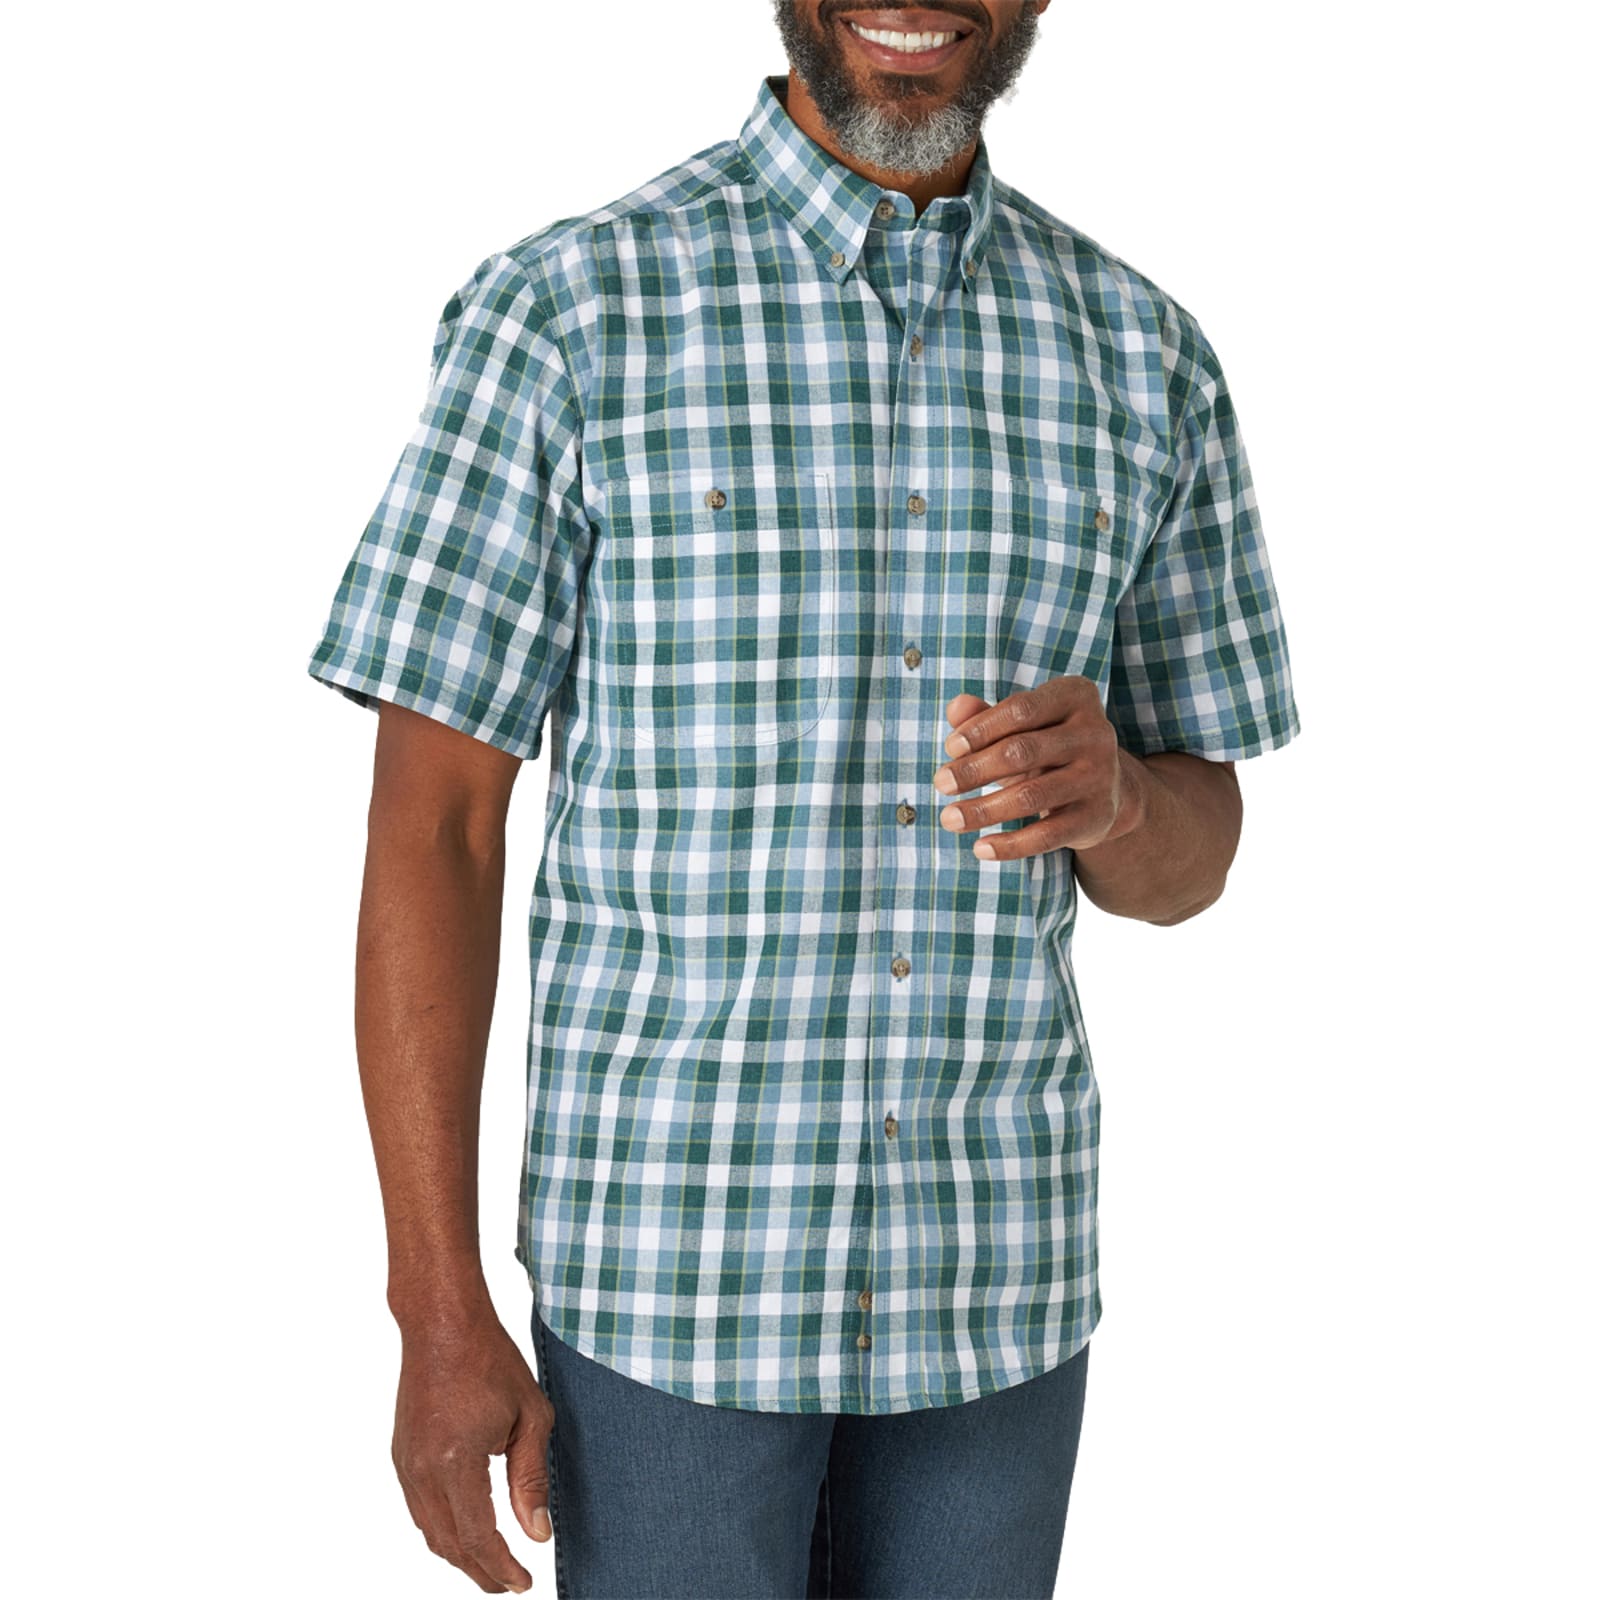 Men's Classic Green/Blue Plaid Button Front Short Sleeve Shirt by